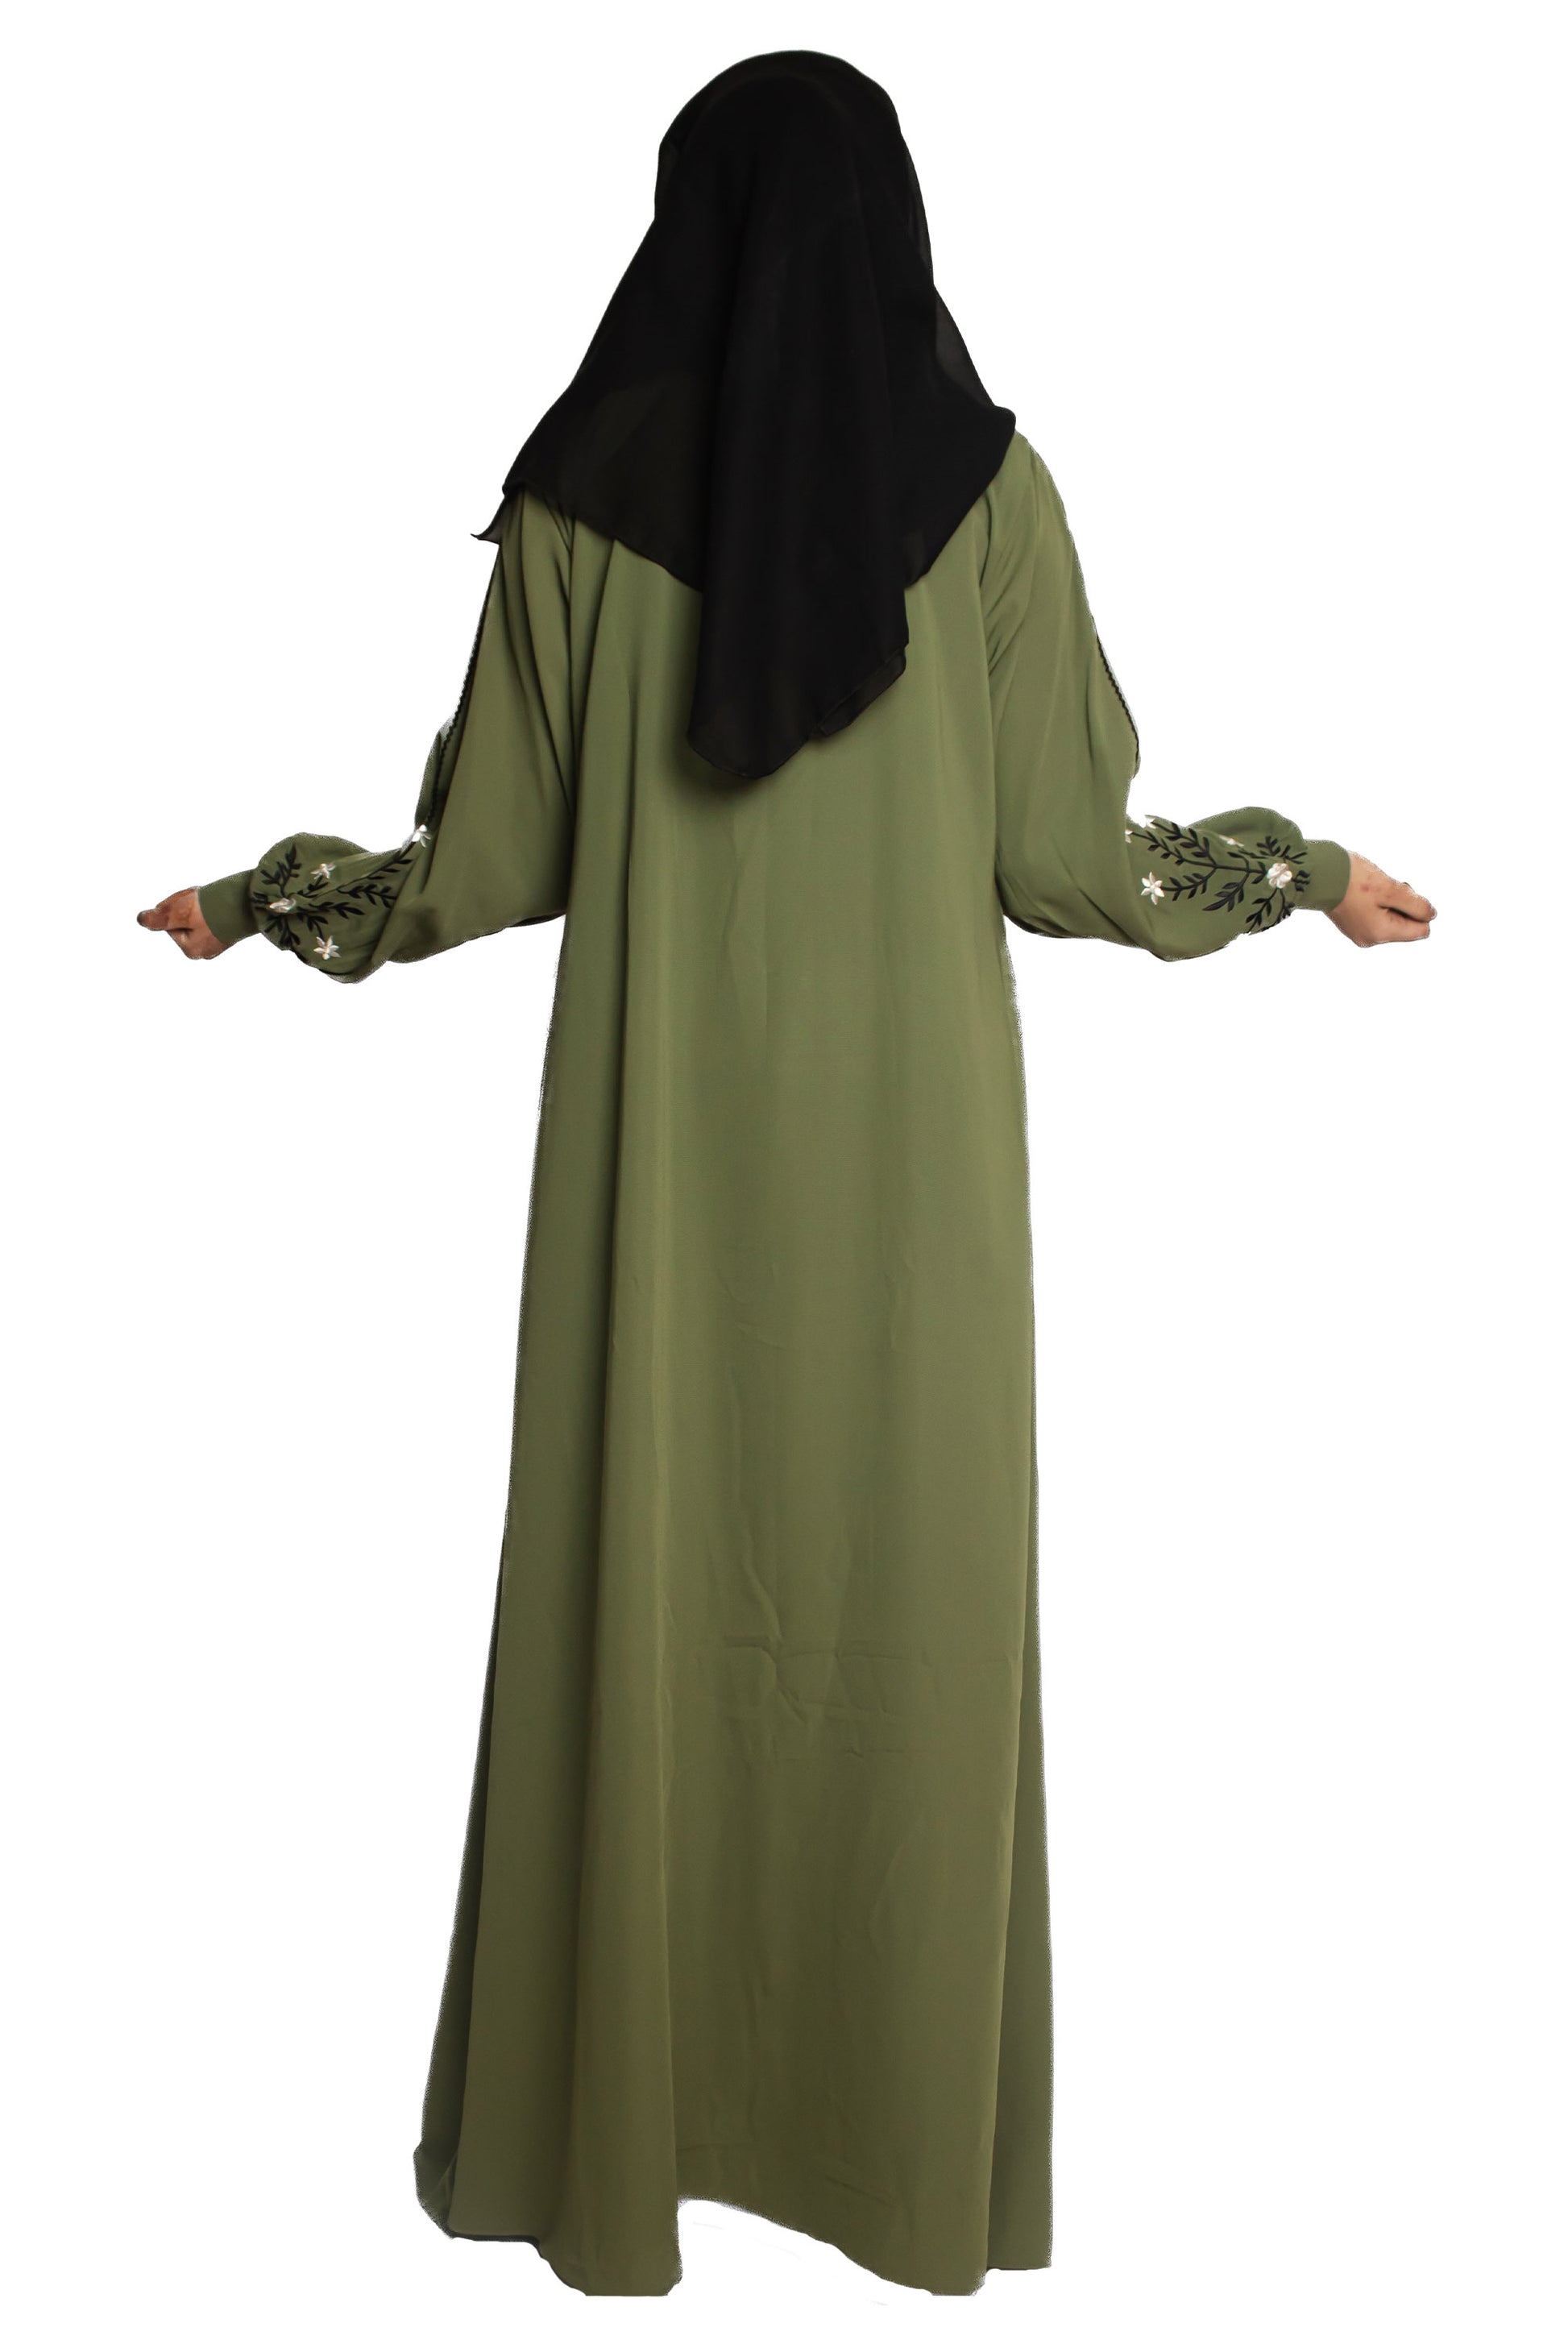 Modest City Beautiful Self Design Gala Embroidery Crepe Fabric Parrot Green Abaya or Burqa With Hijab for Women & Girls- Series Laiba